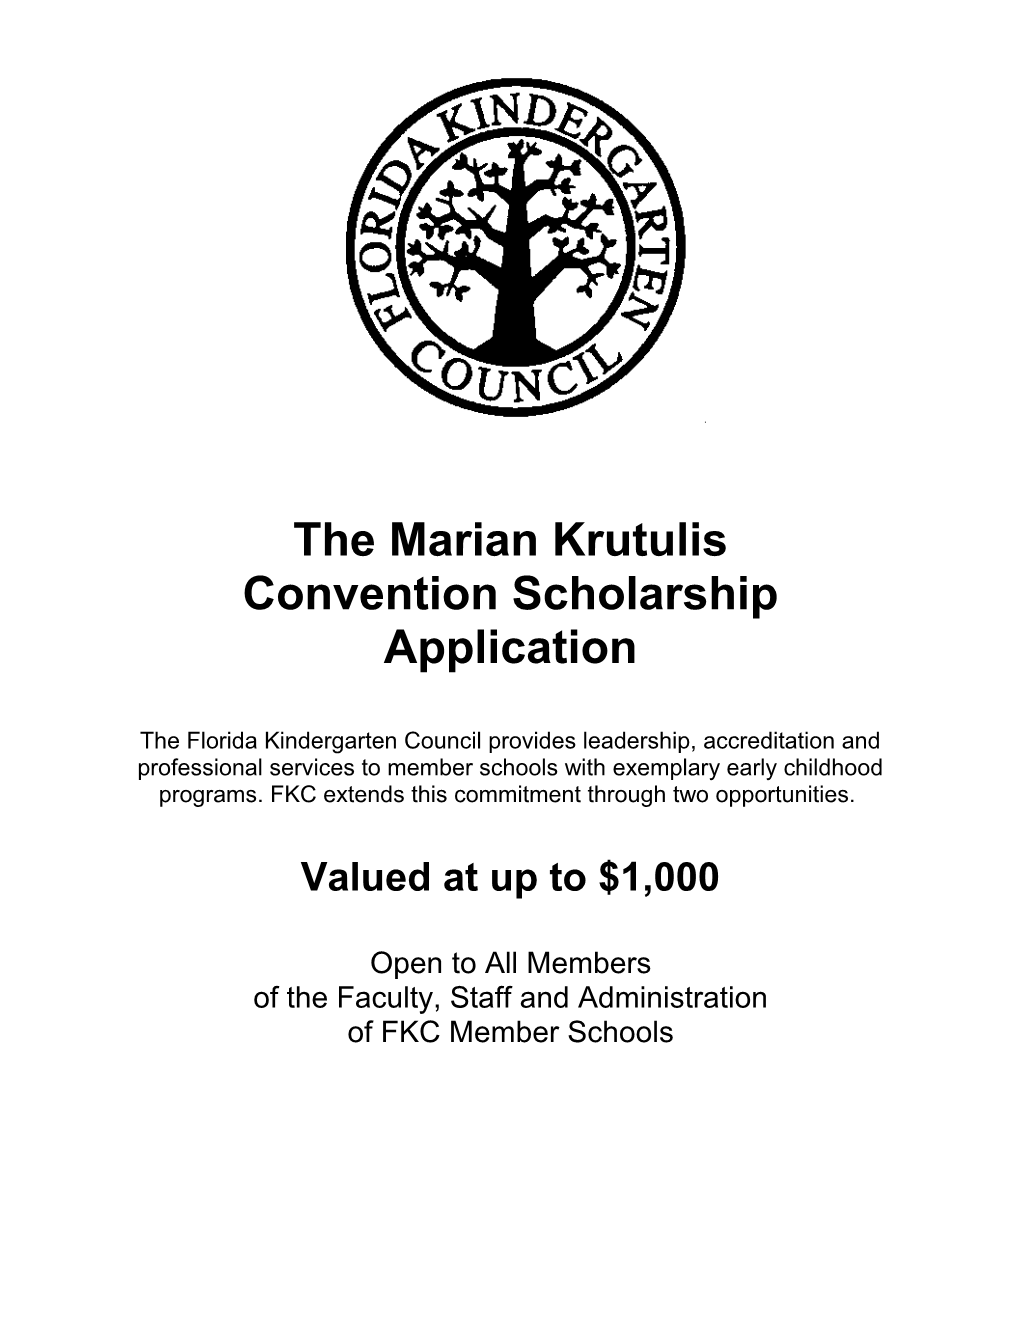 Convention Scholarship Application